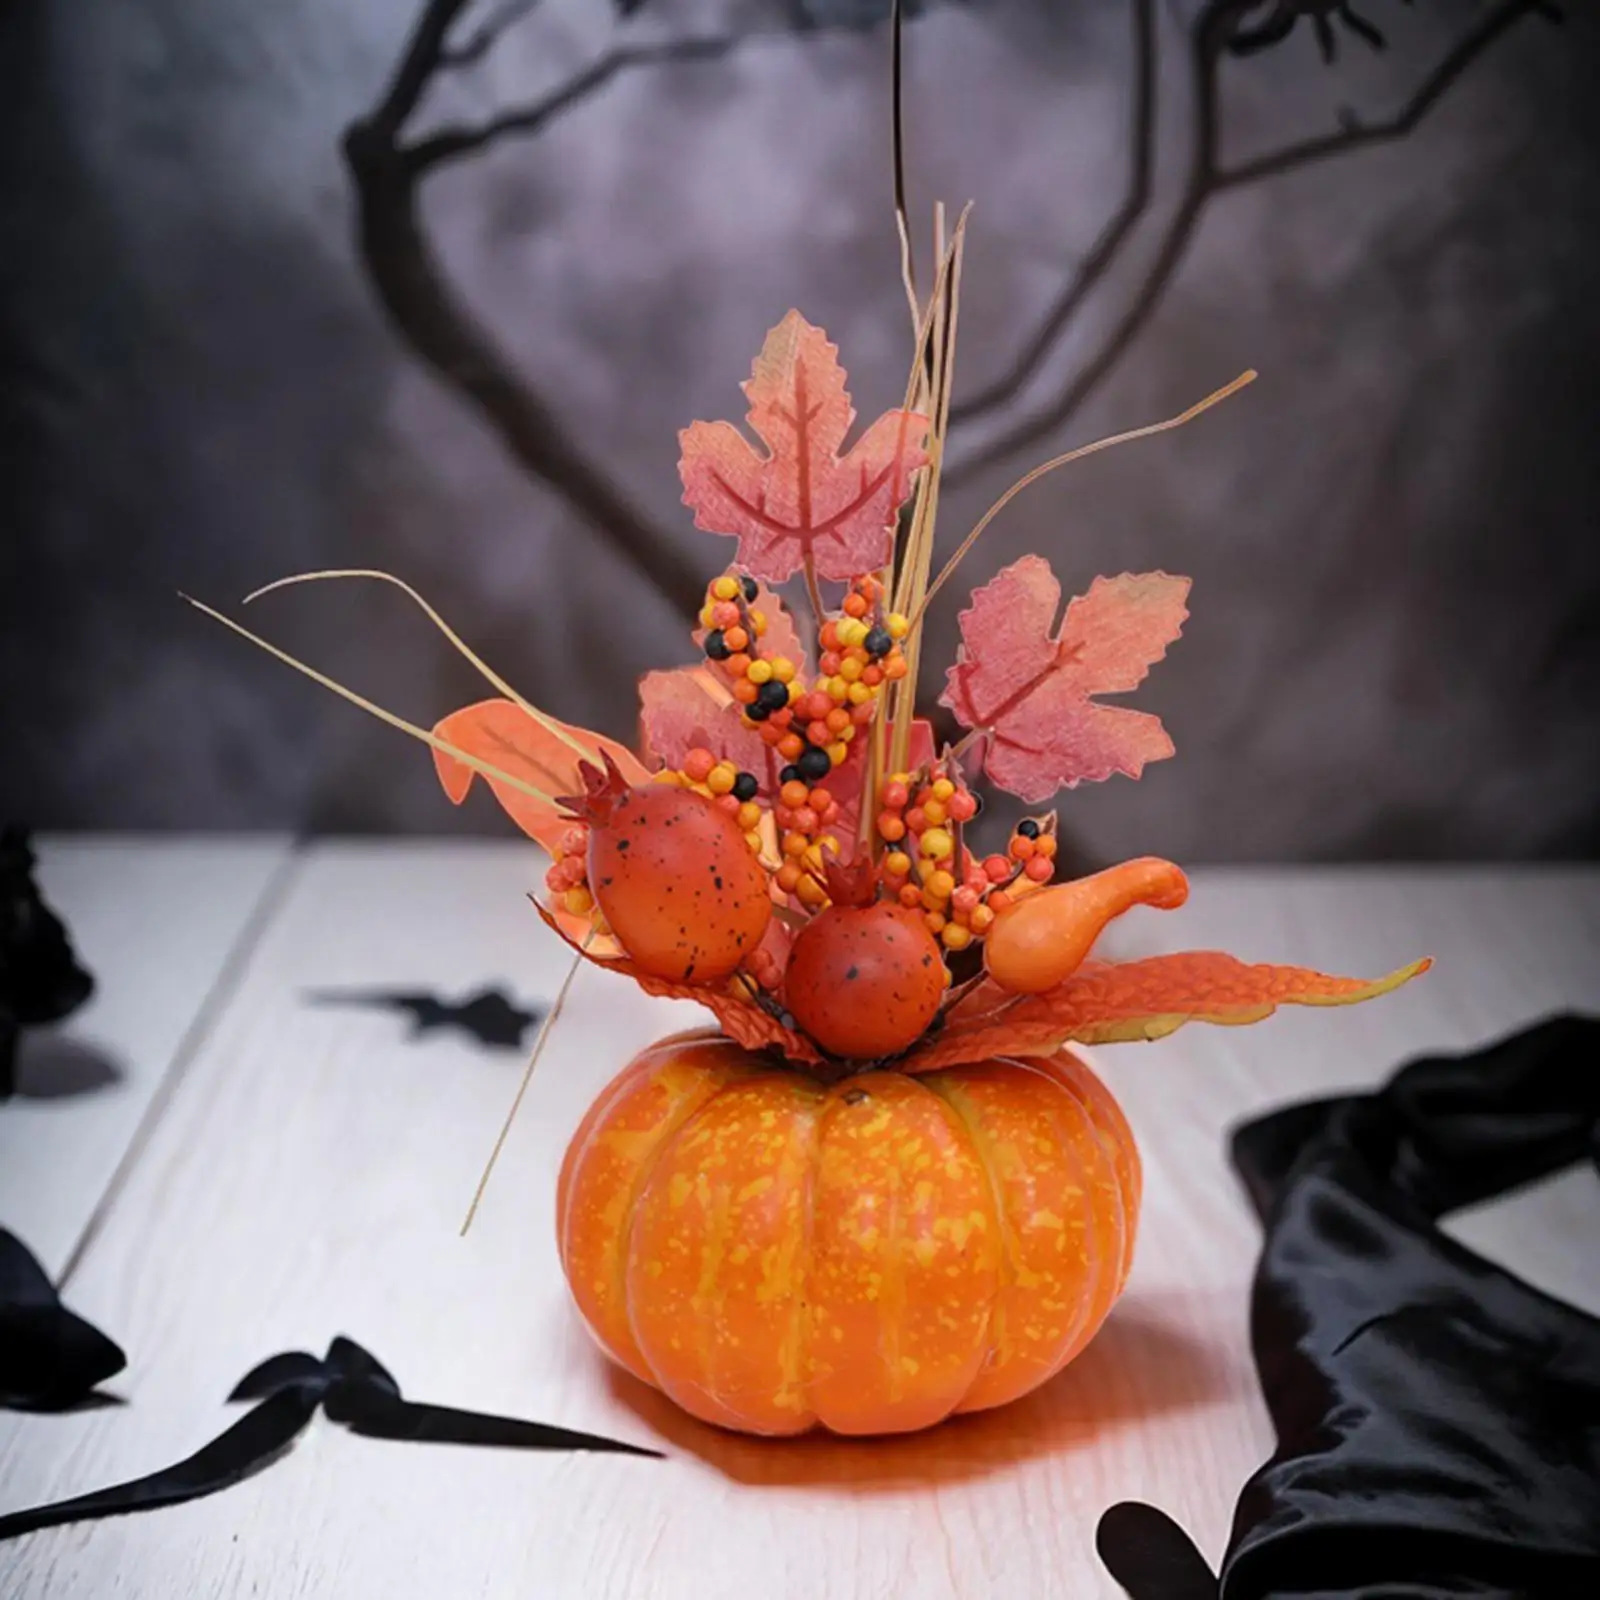 Artificial Pumpkin with Flowers Photography Props Fall Thanksgiving Decoration for Thanksgiving Bedroom Porch Office Decorations